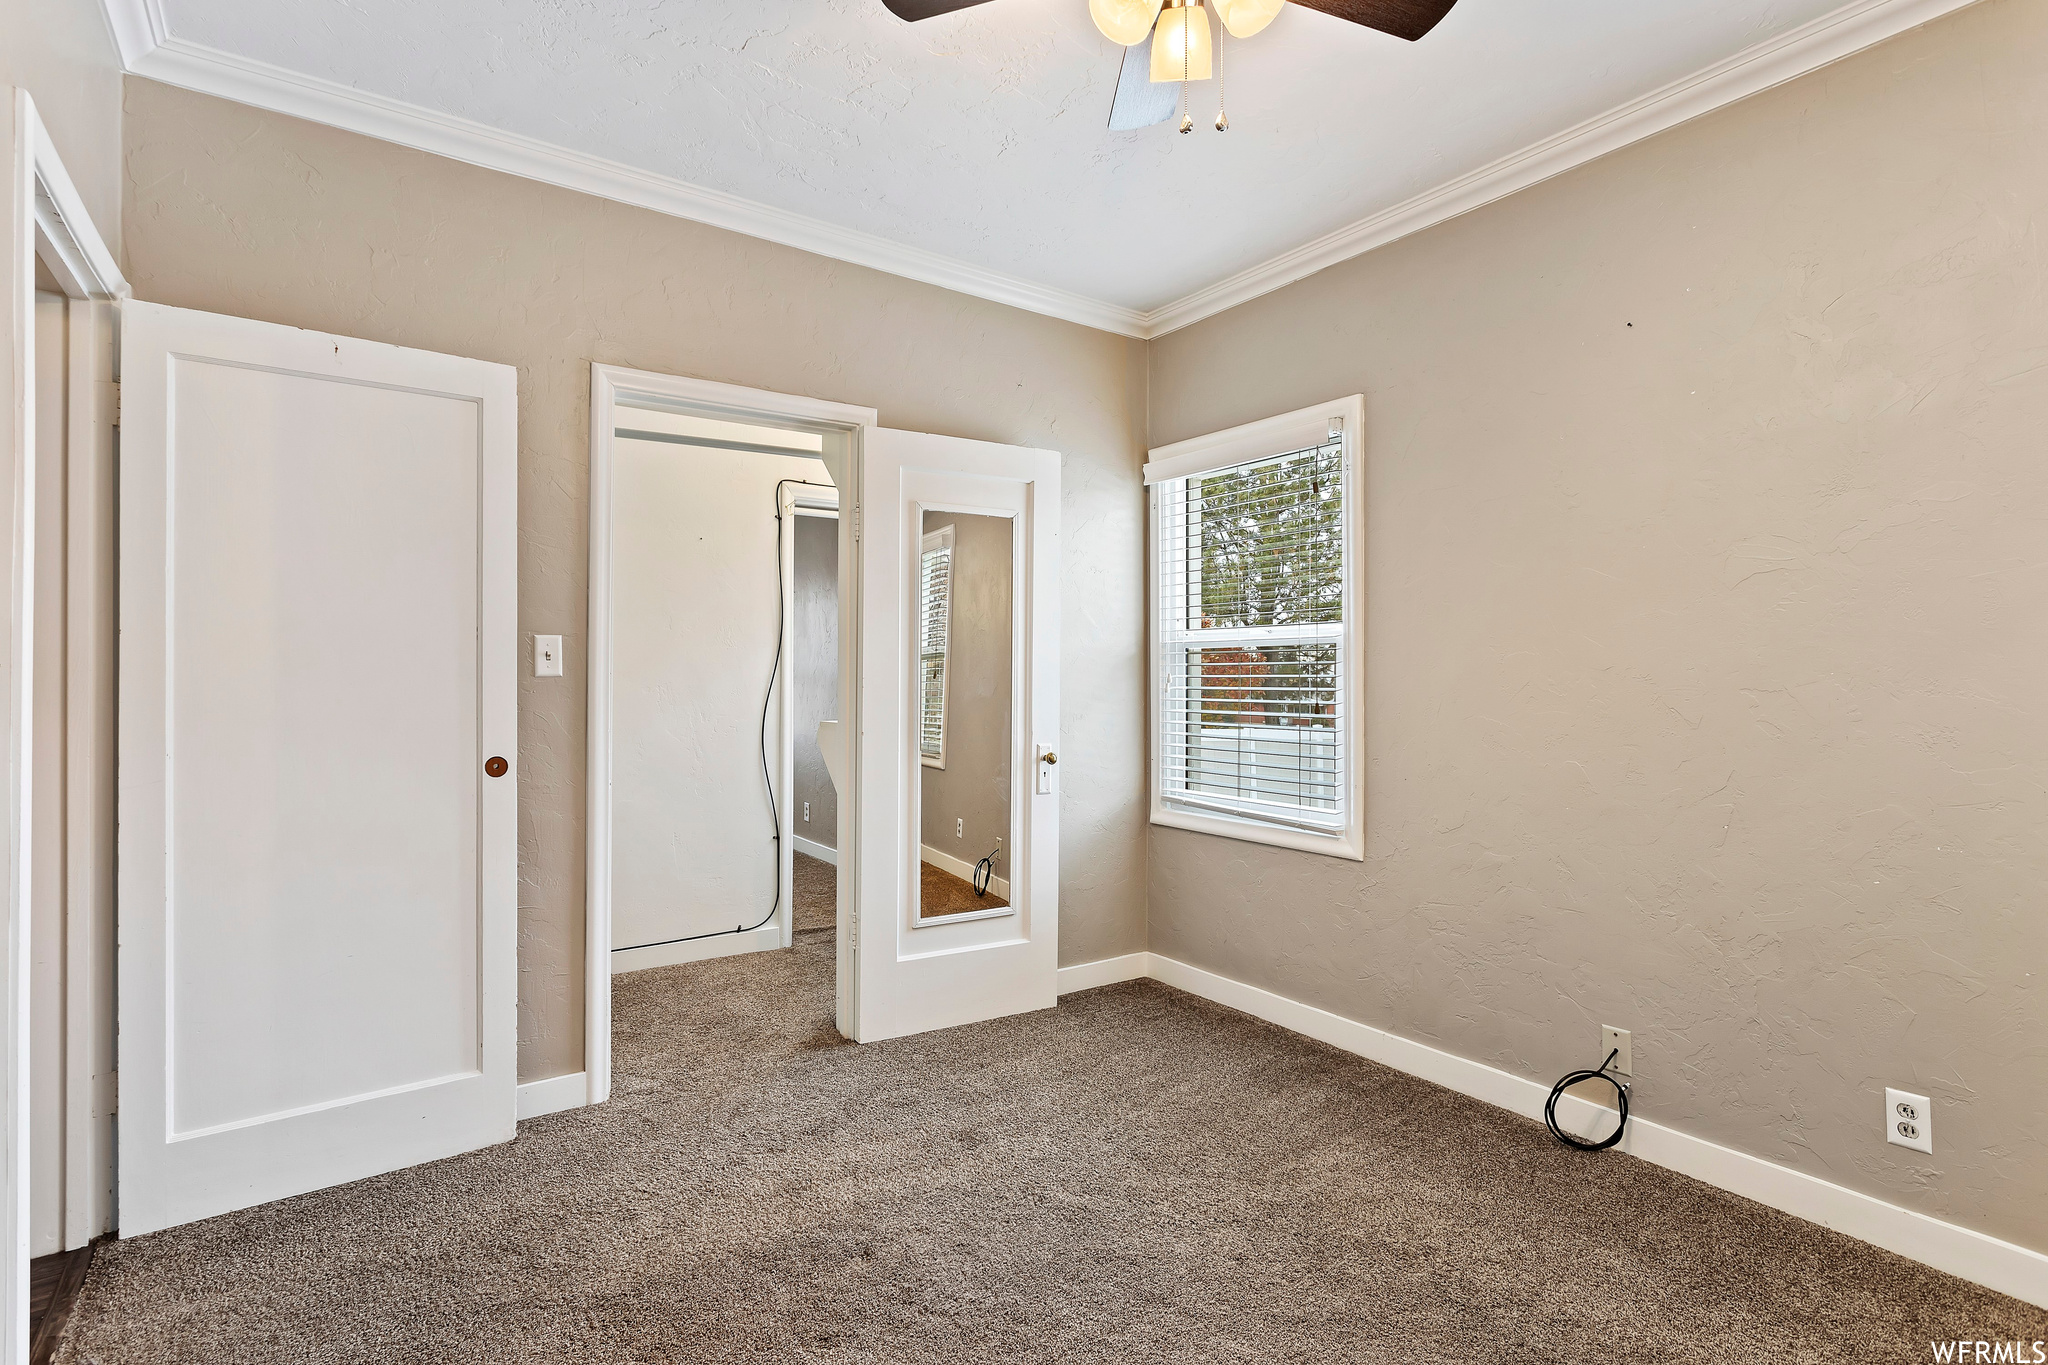 Unfurnished bedroom with ceiling fan, carpet, and crown molding